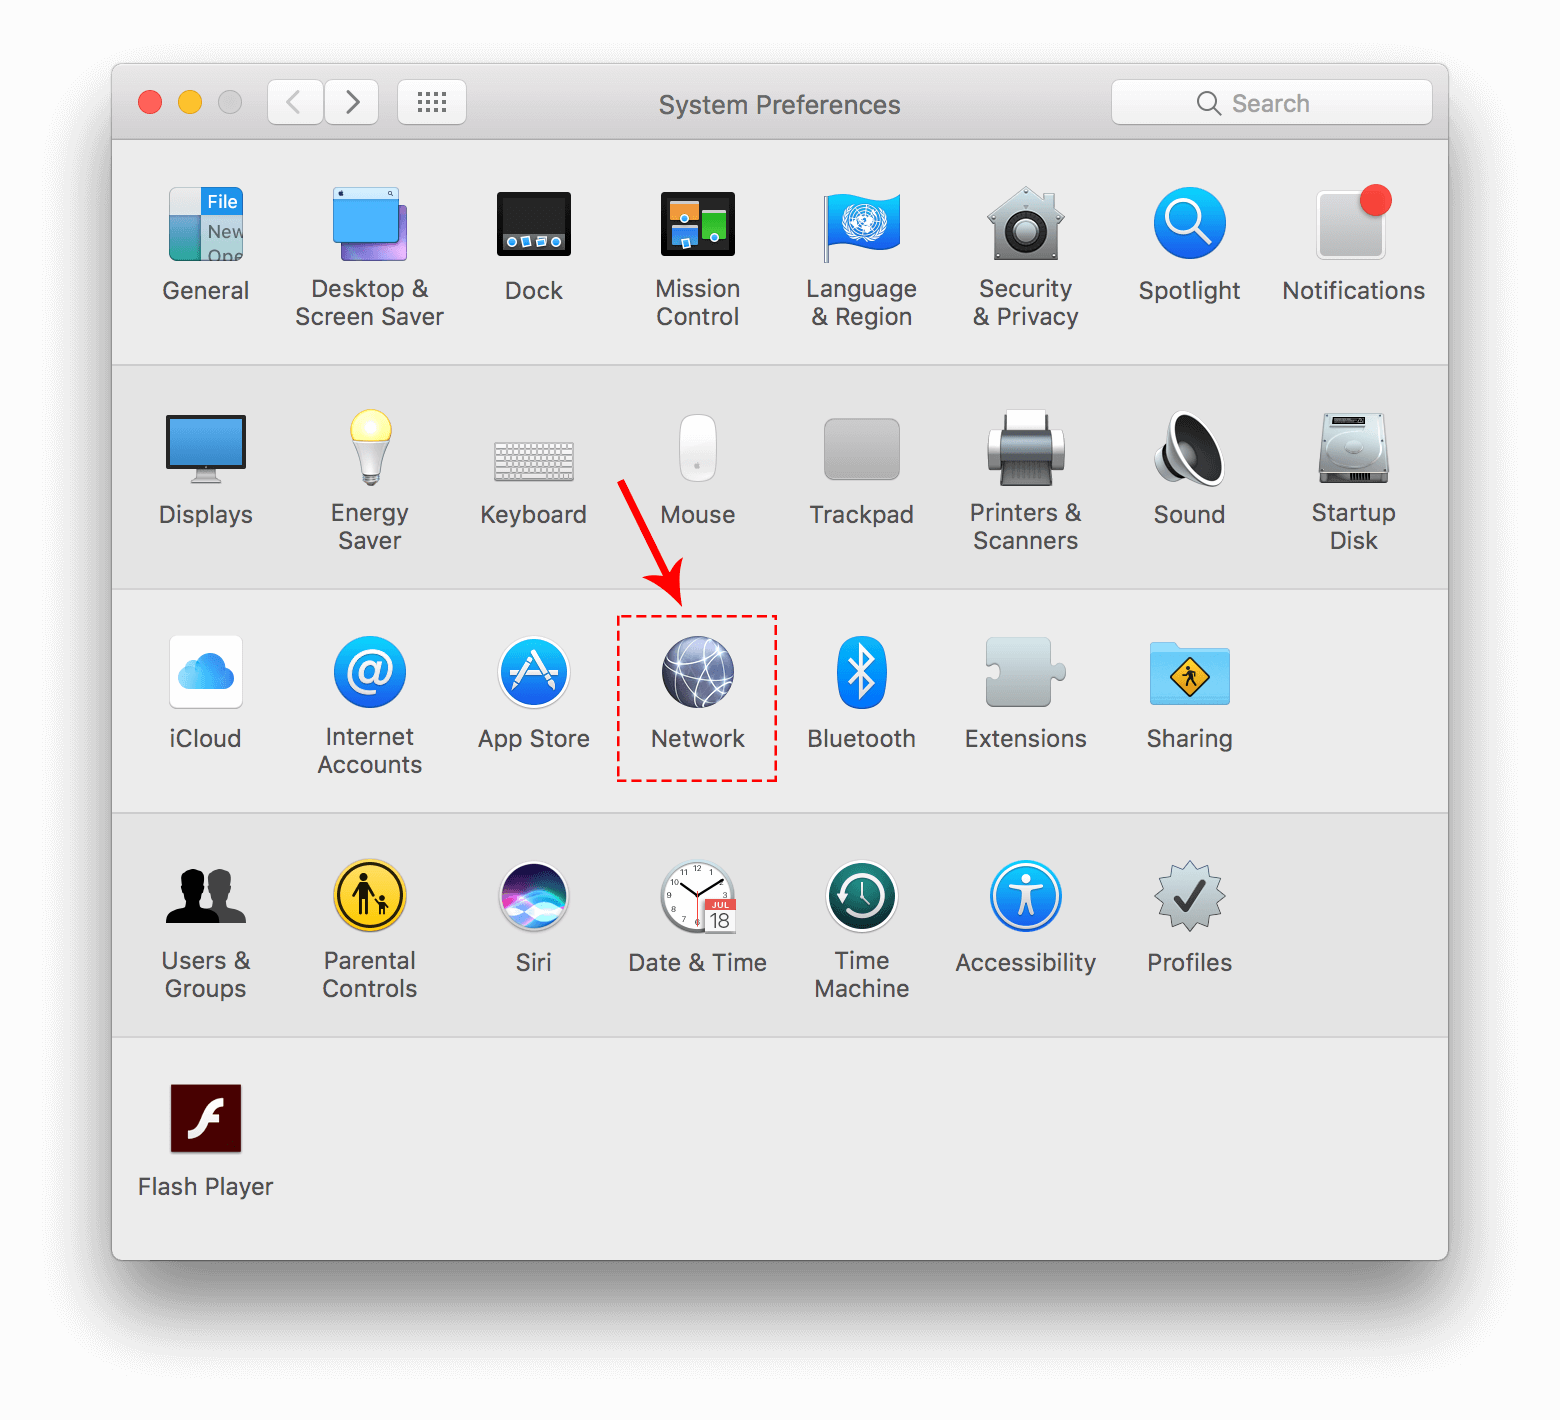 Preferences network on macOSX